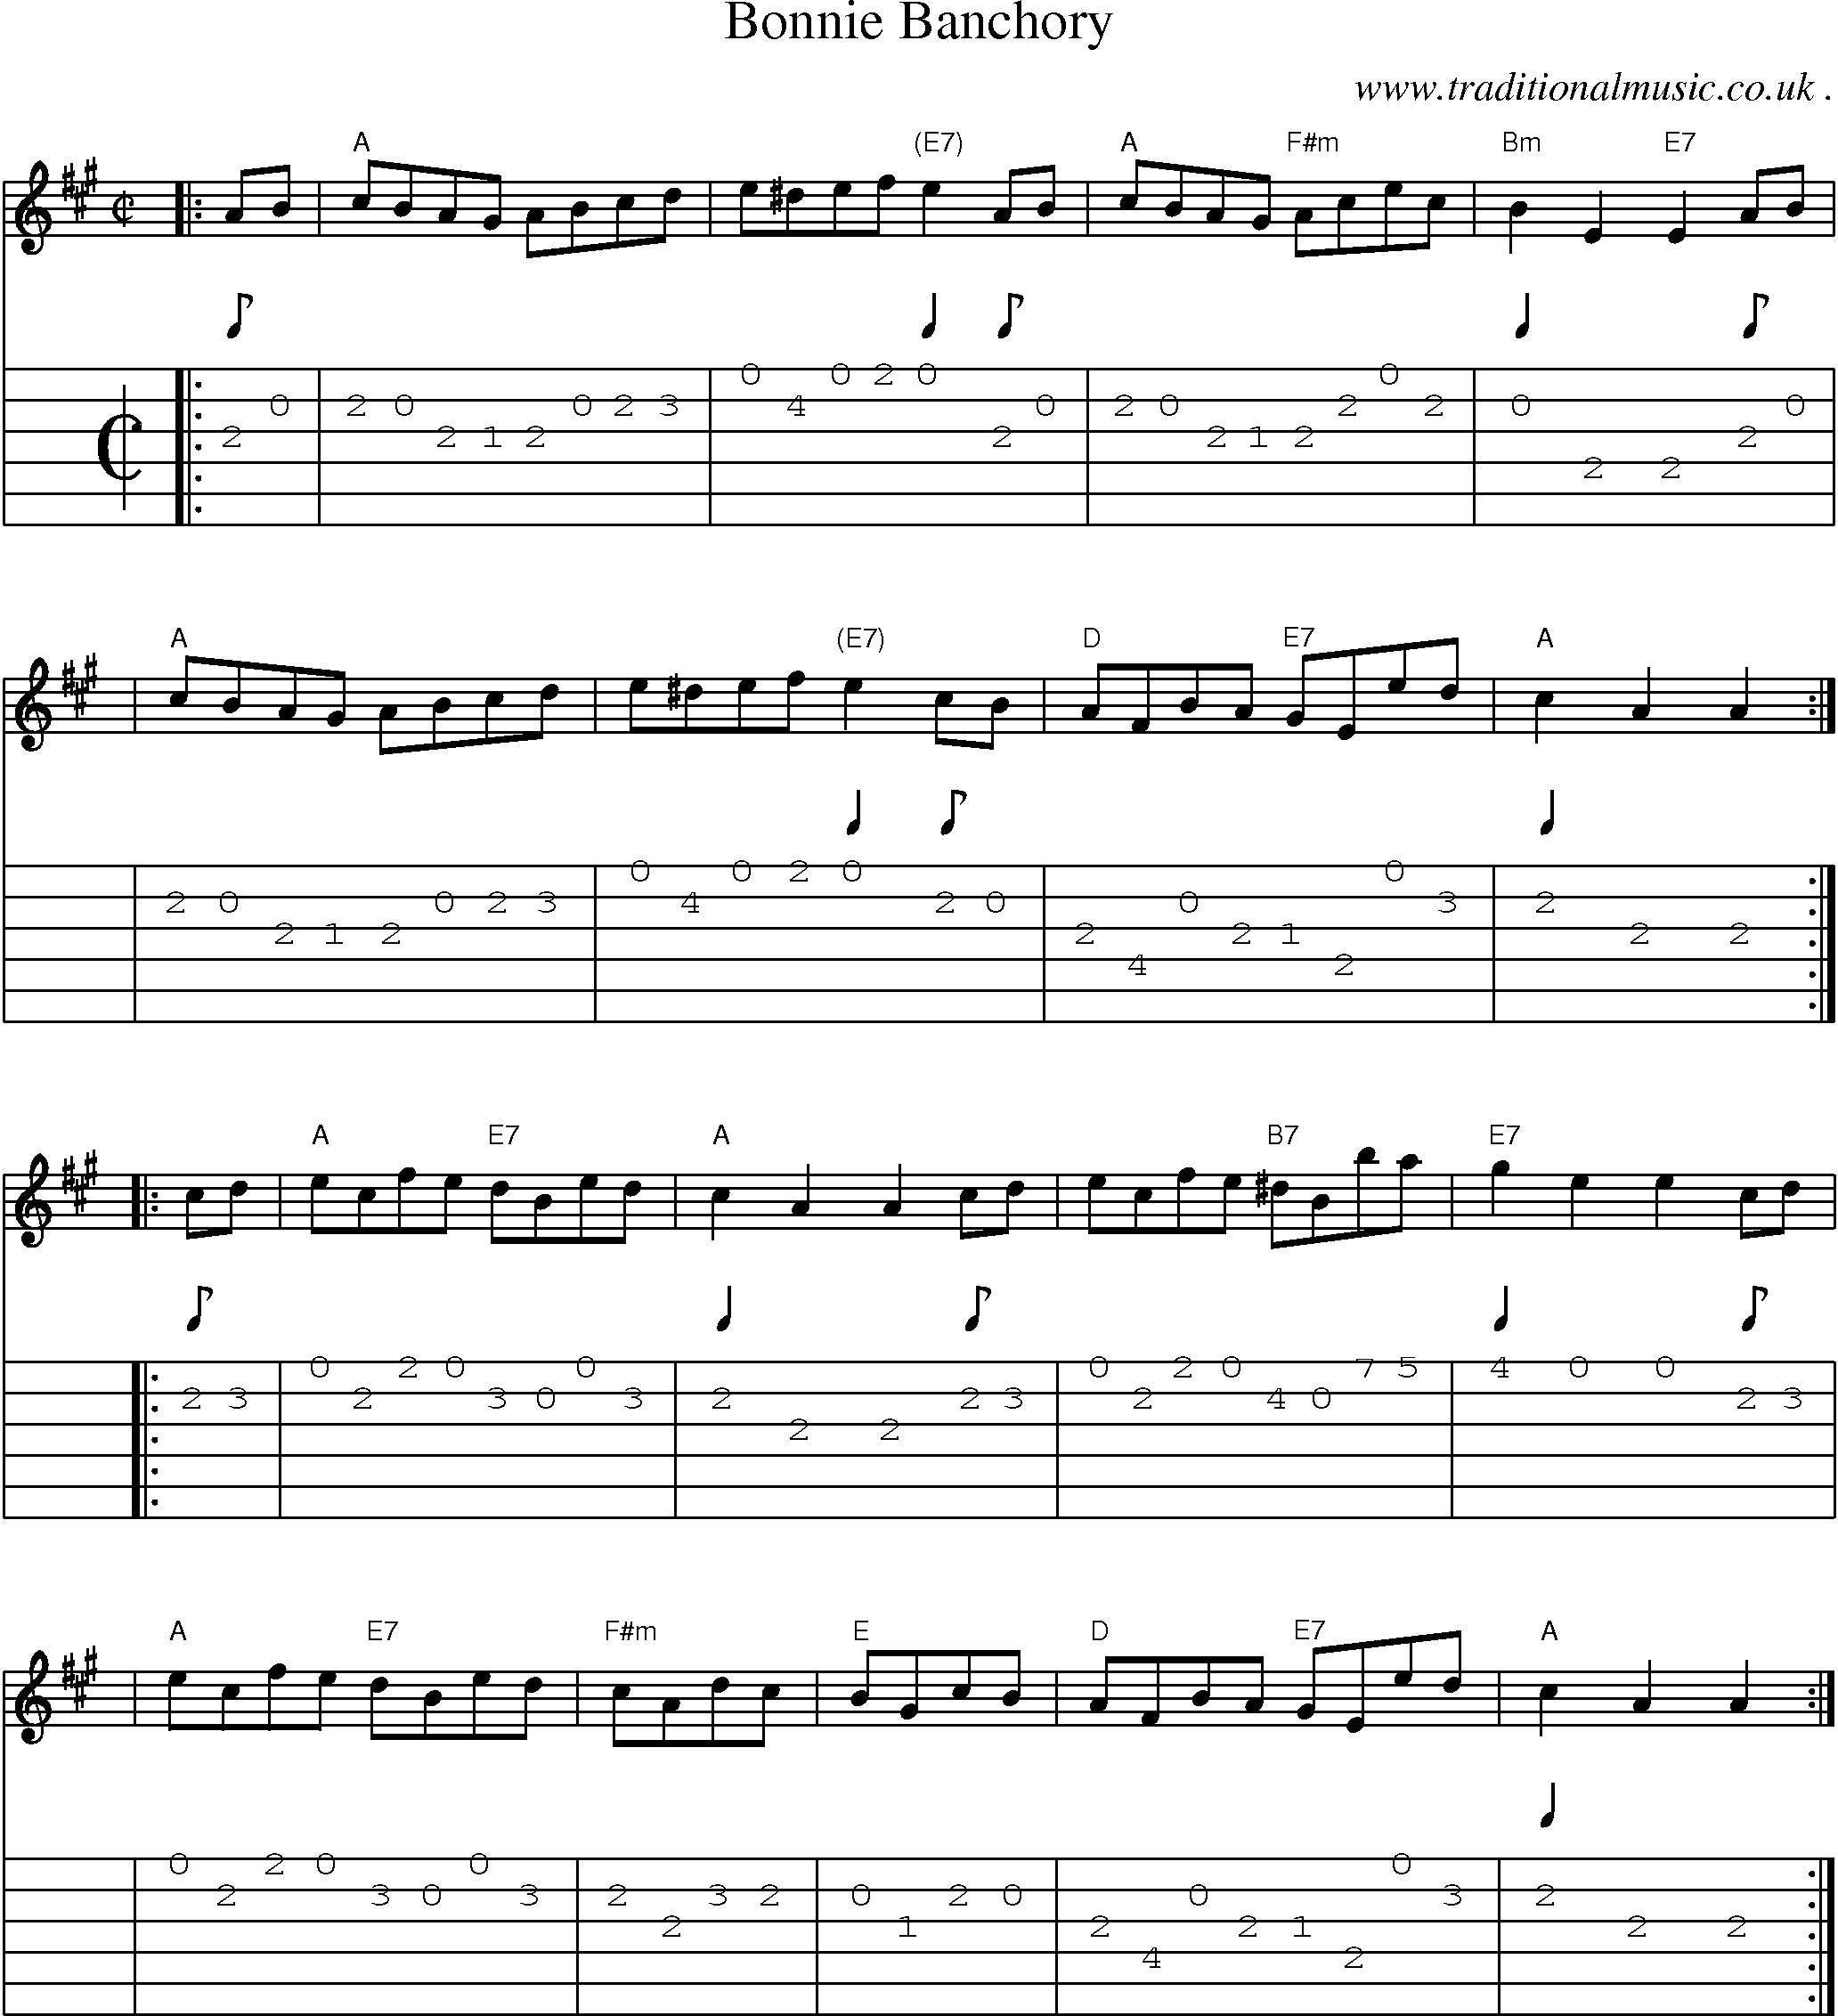 Sheet-music  score, Chords and Guitar Tabs for Bonnie Banchory